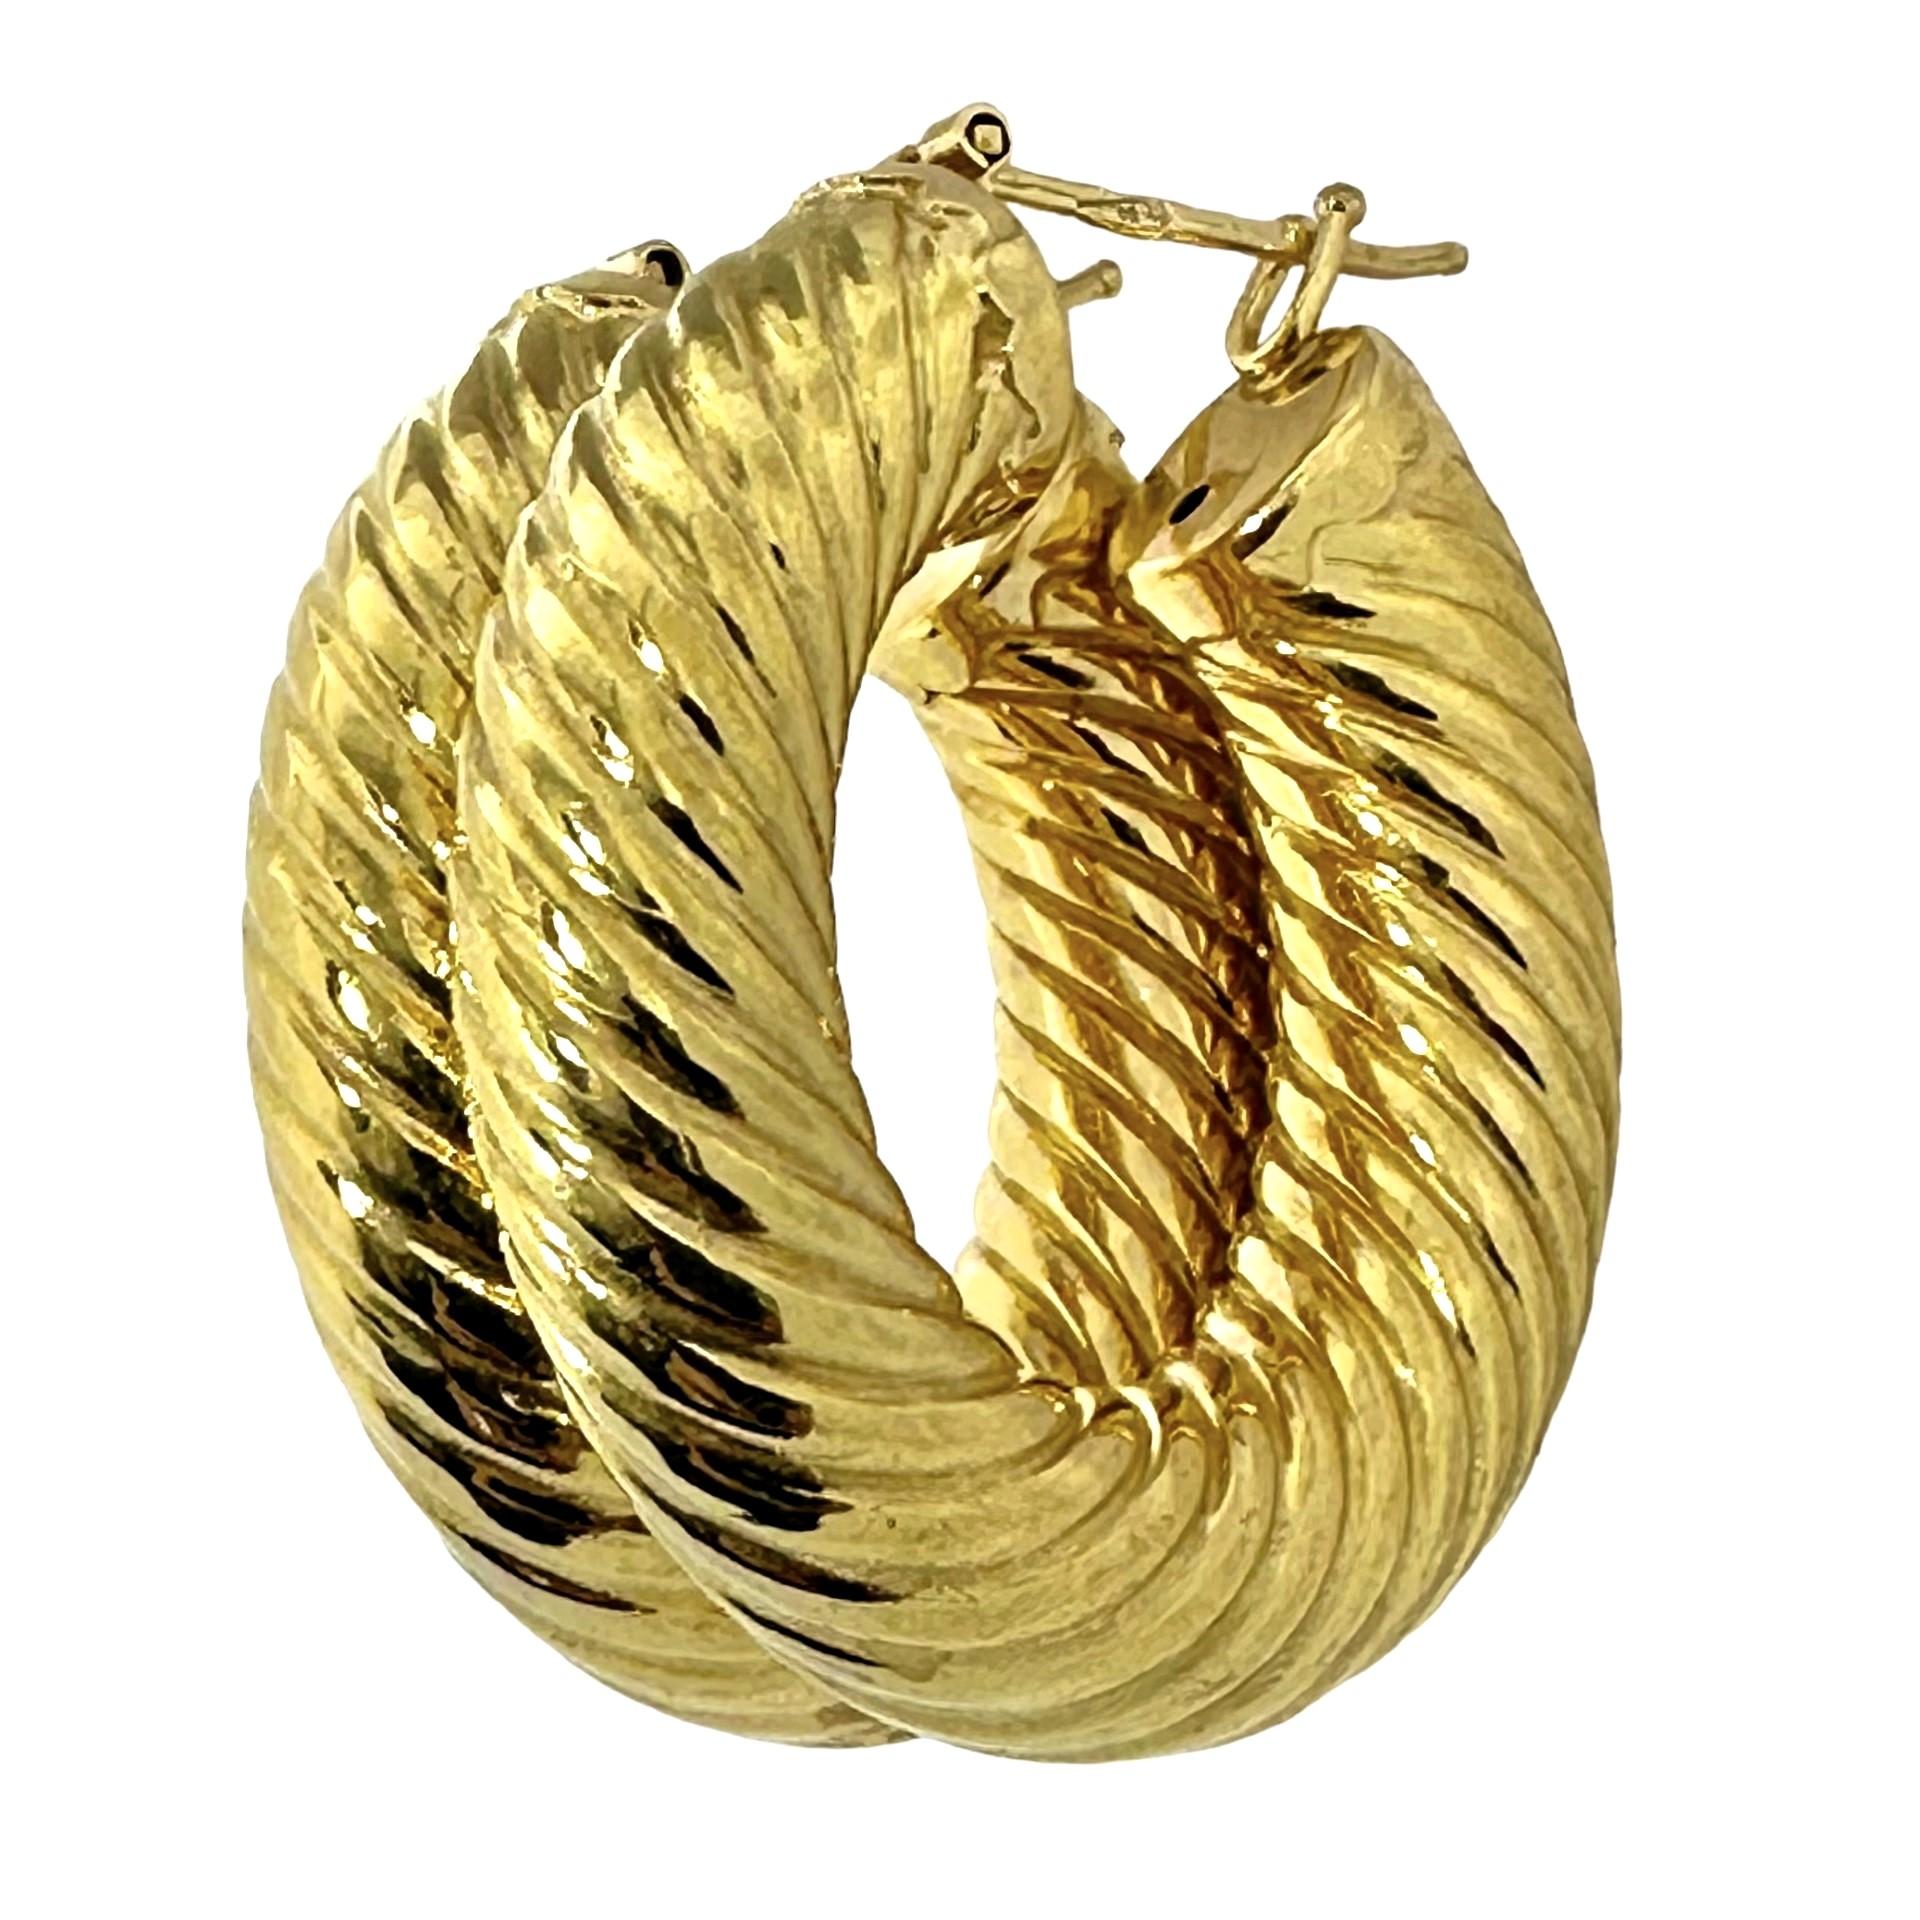 Modern Italian 18K Yellow Gold Twisted Hoop Earrings 1.25 Inches Long x 1/4 Inch Thick For Sale